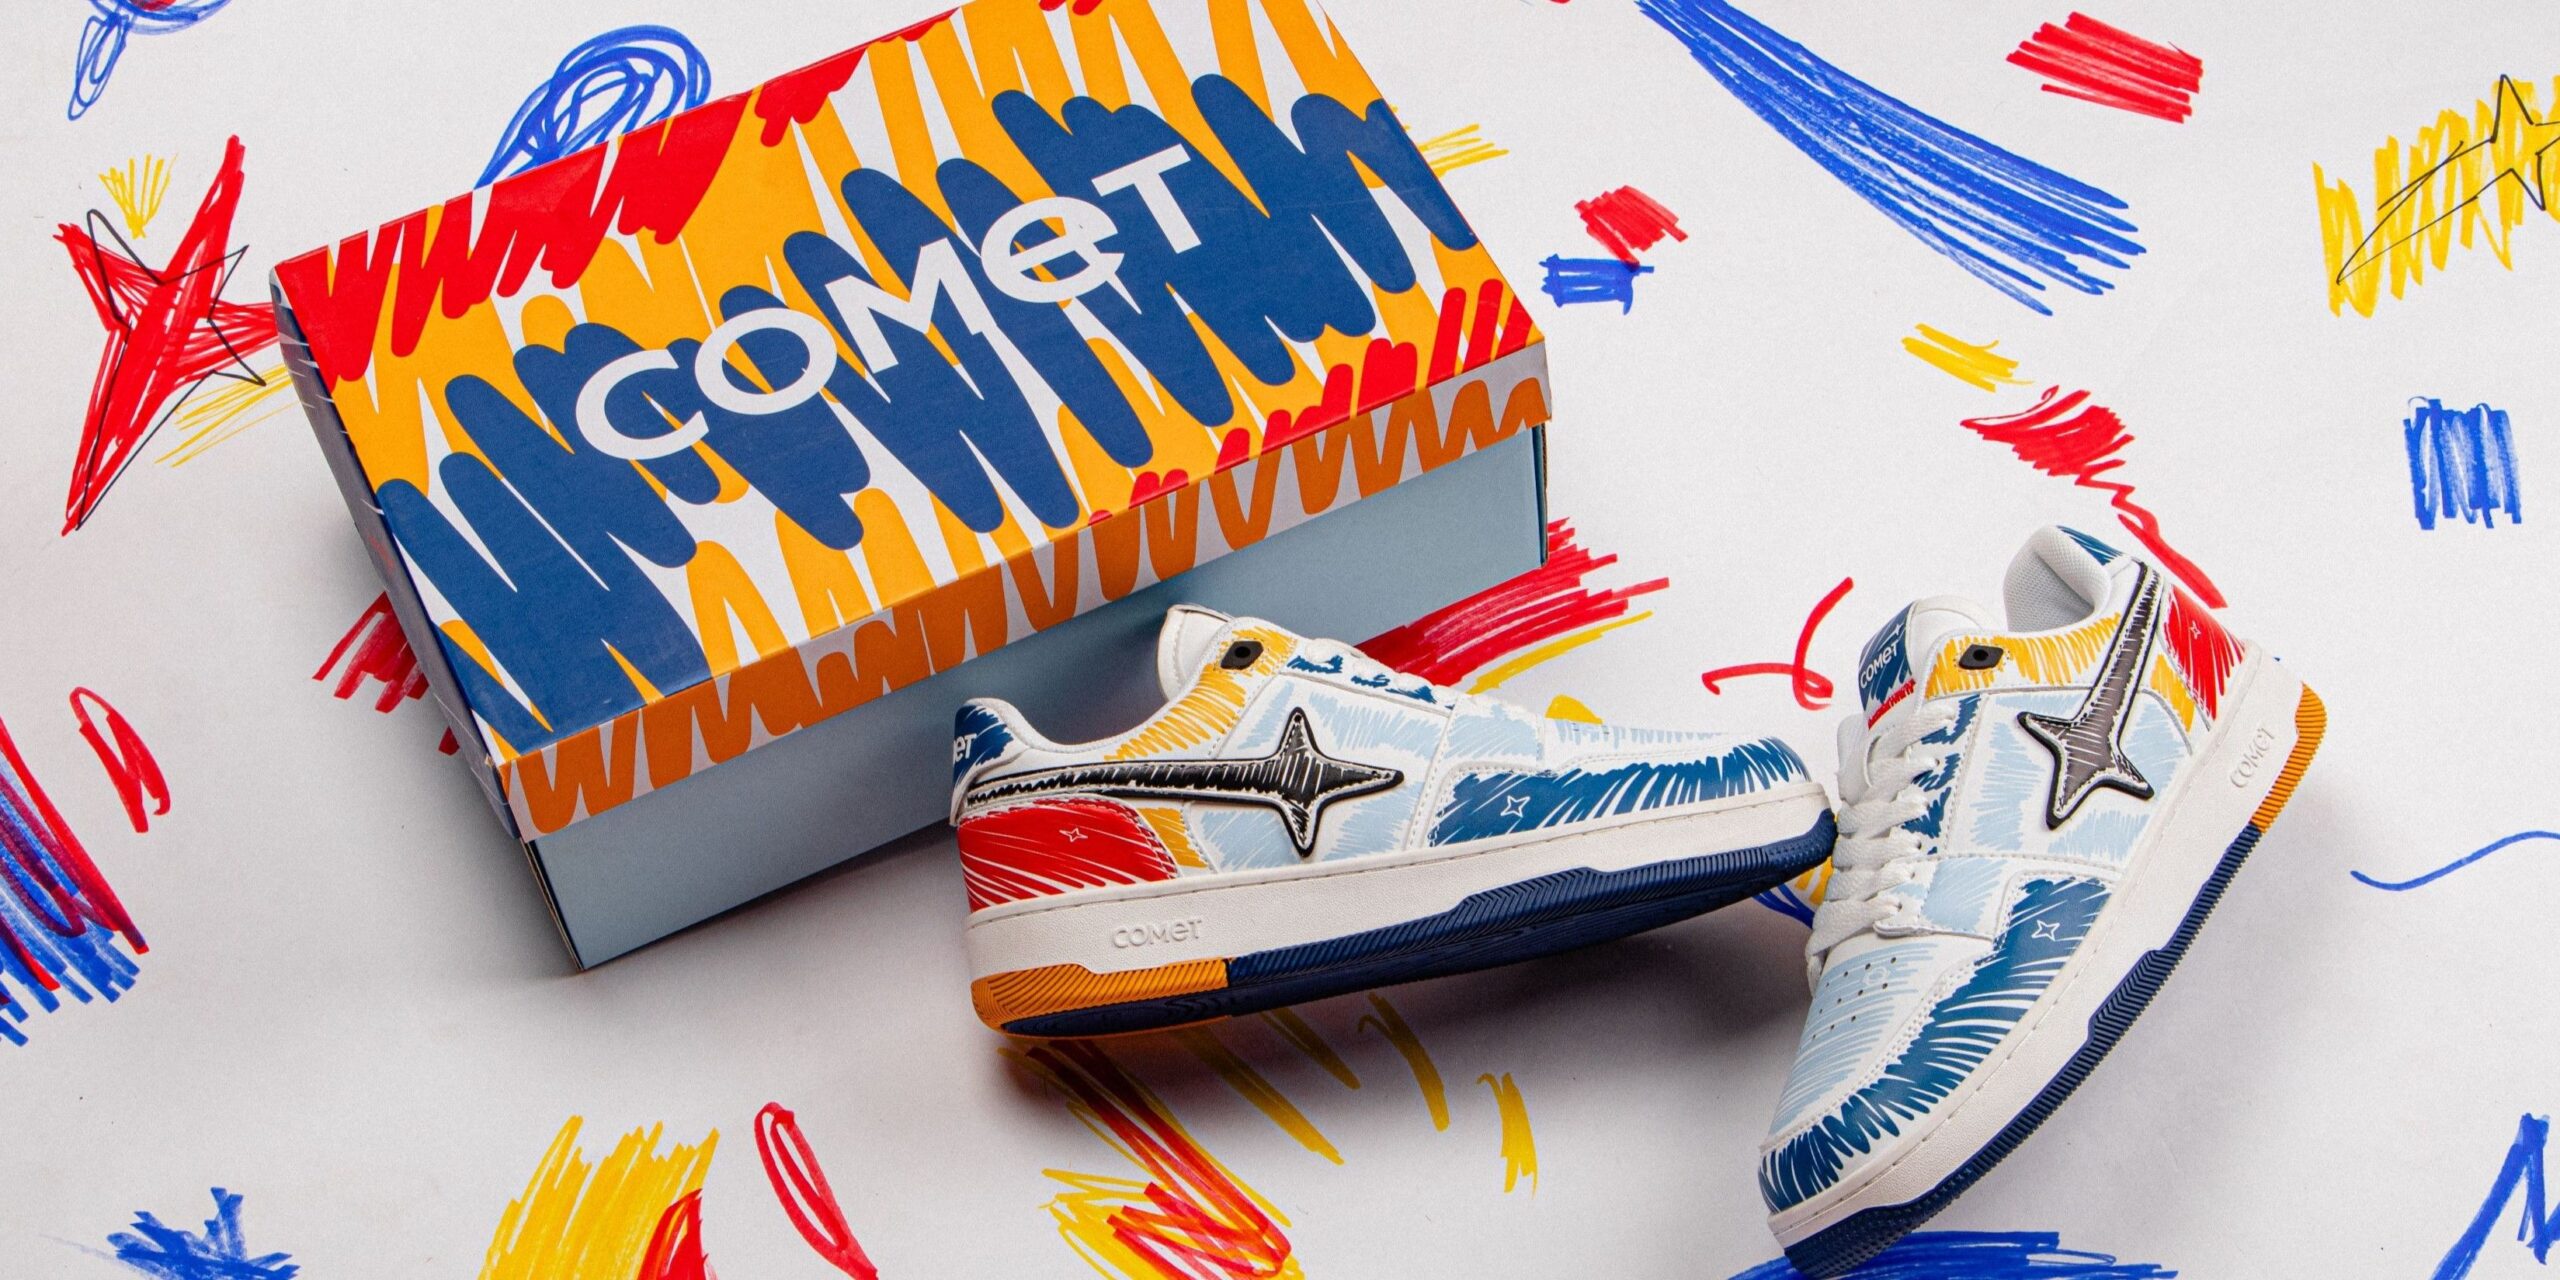 You are currently viewing Sneaker startup Comet raises $5M from Elevation capital, Nexus Ventures